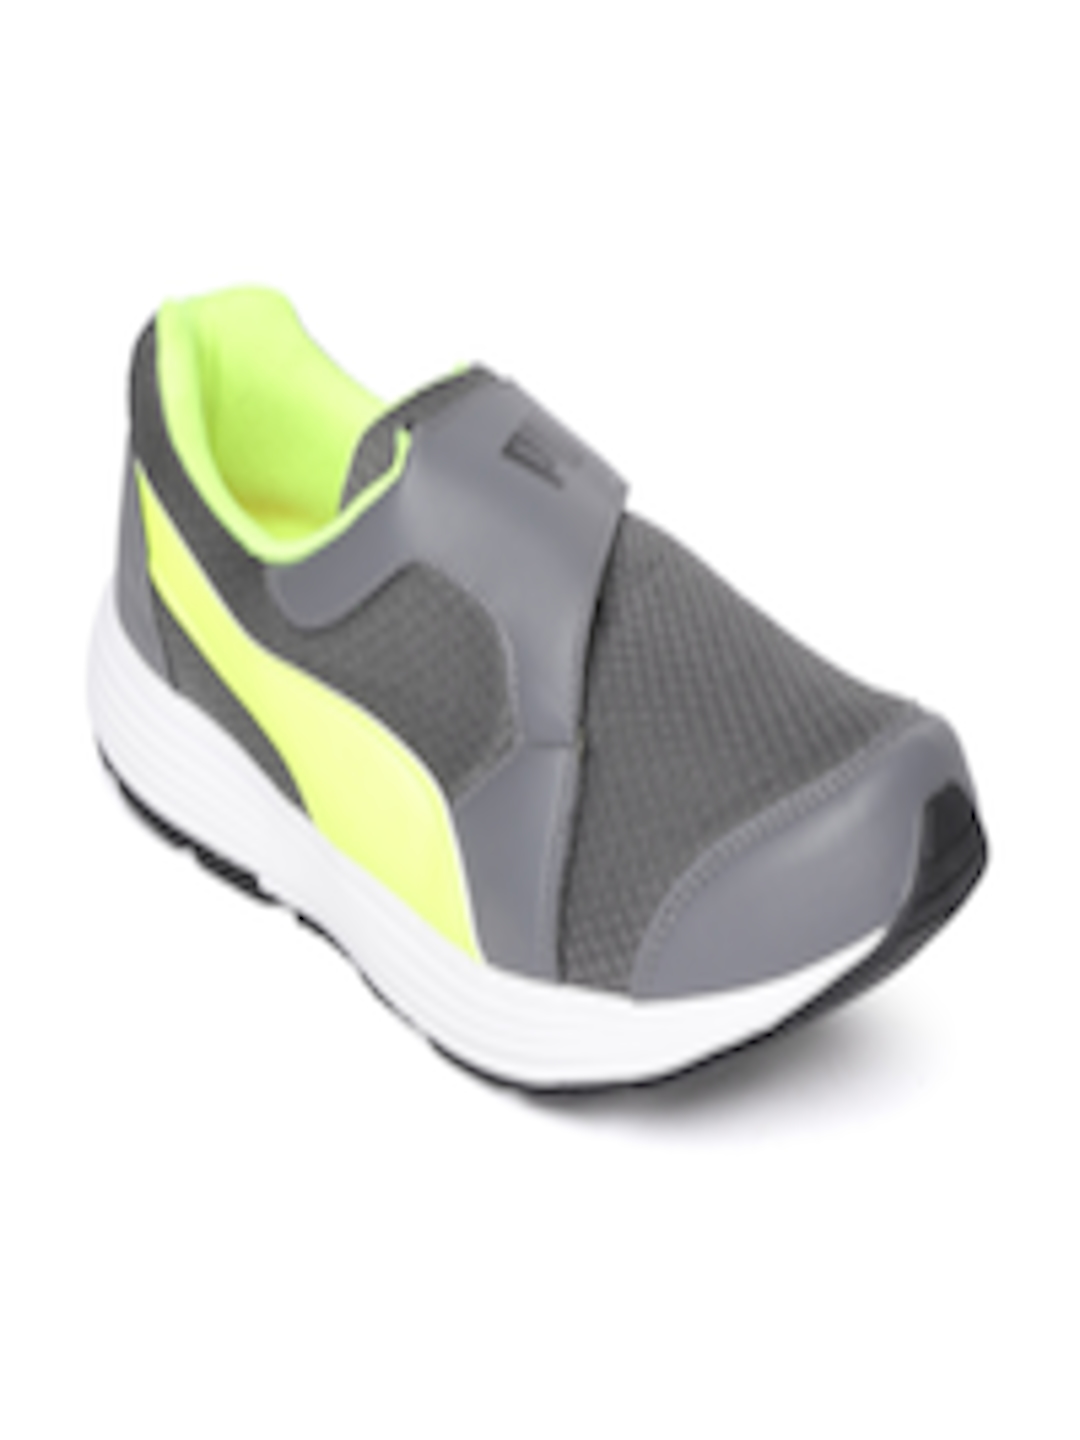 Buy Puma Men Grey Reef Slip On Running Shoes - Sports Shoes for Men ...